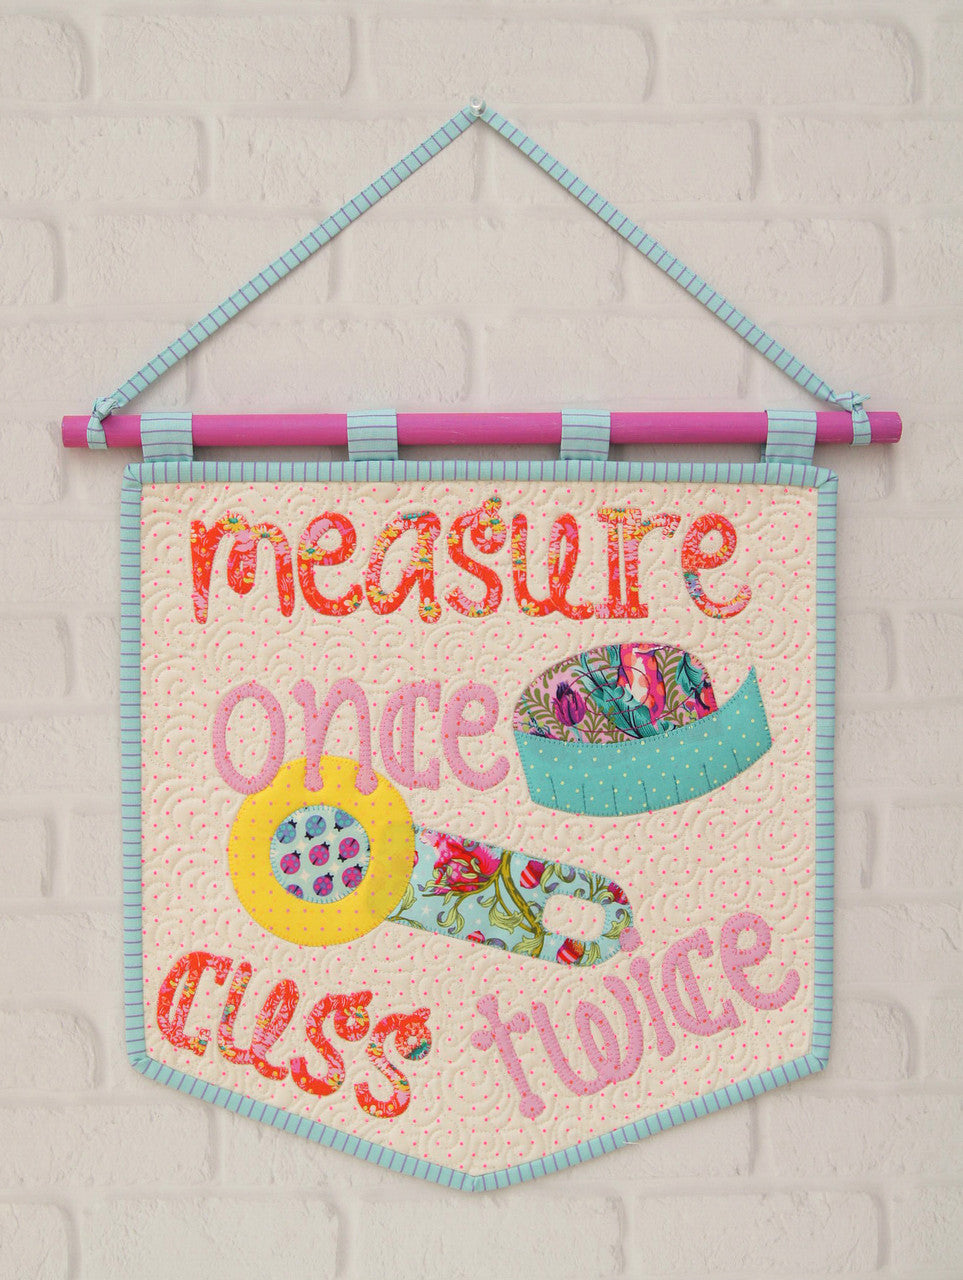 Measure Once Mini Quilt Pattern